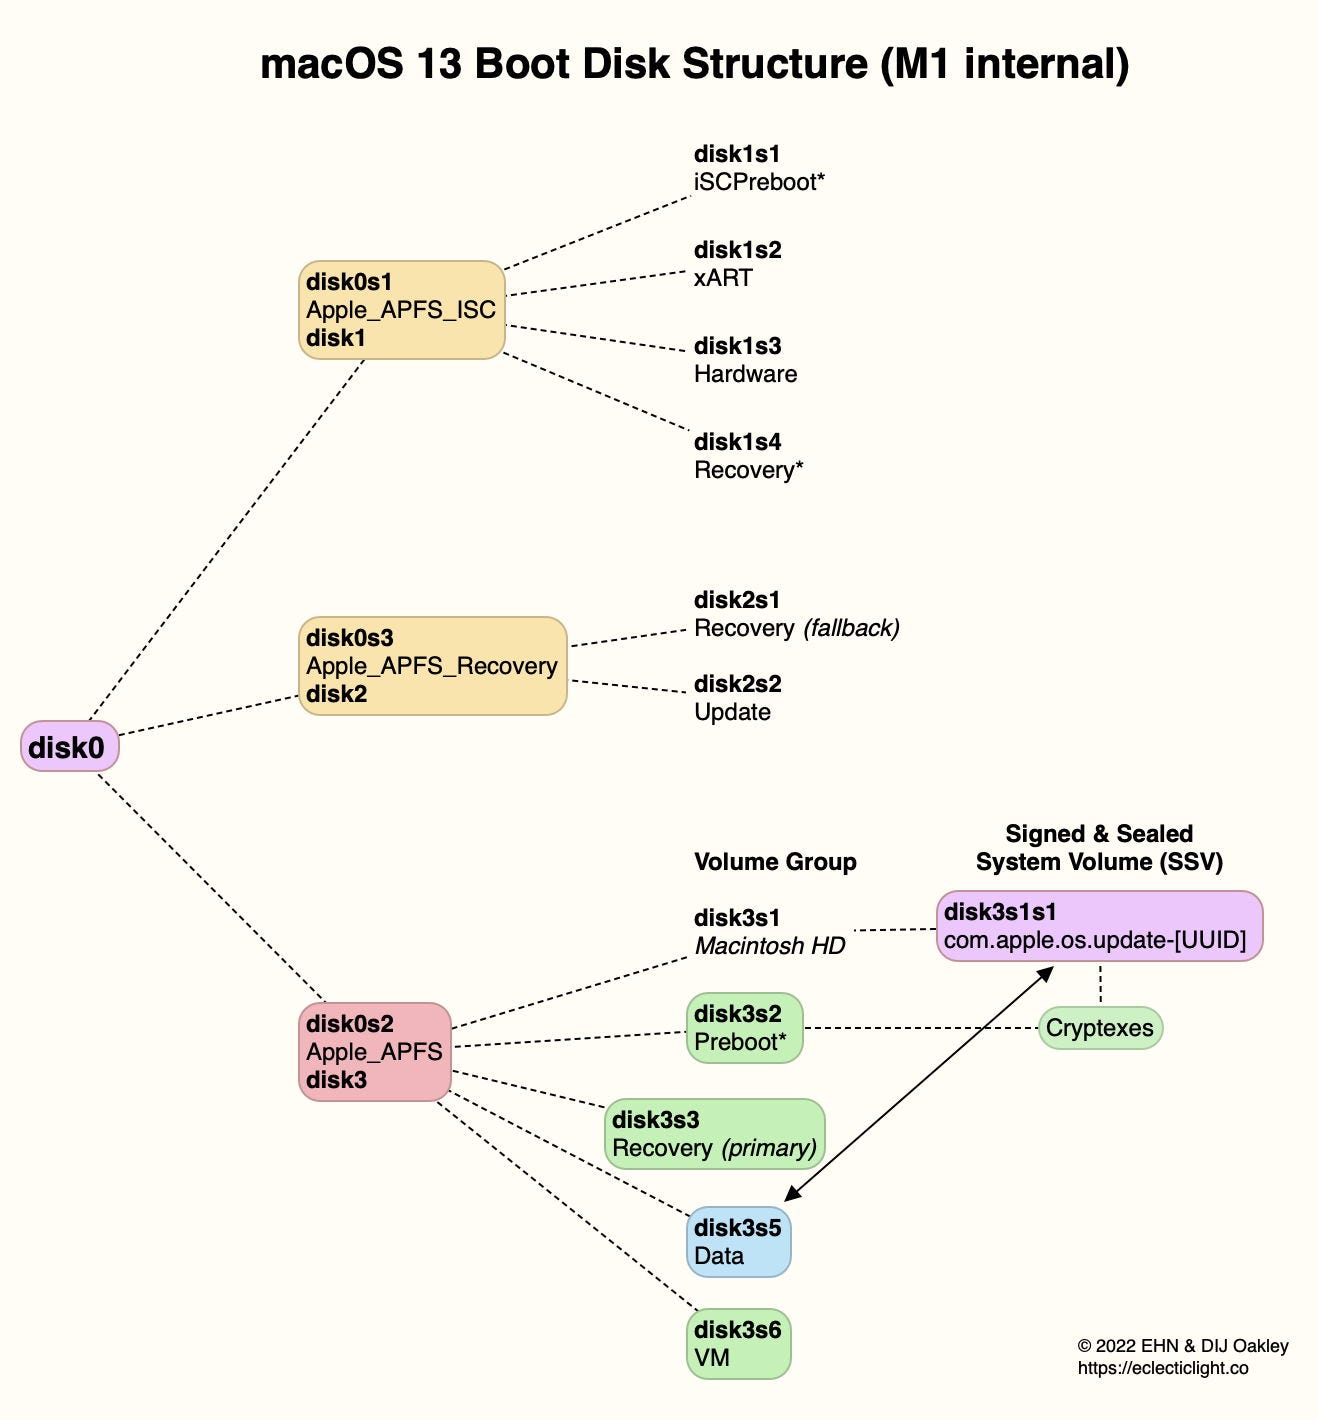 macOS 13 Boot Disk Structure (M1 internal)